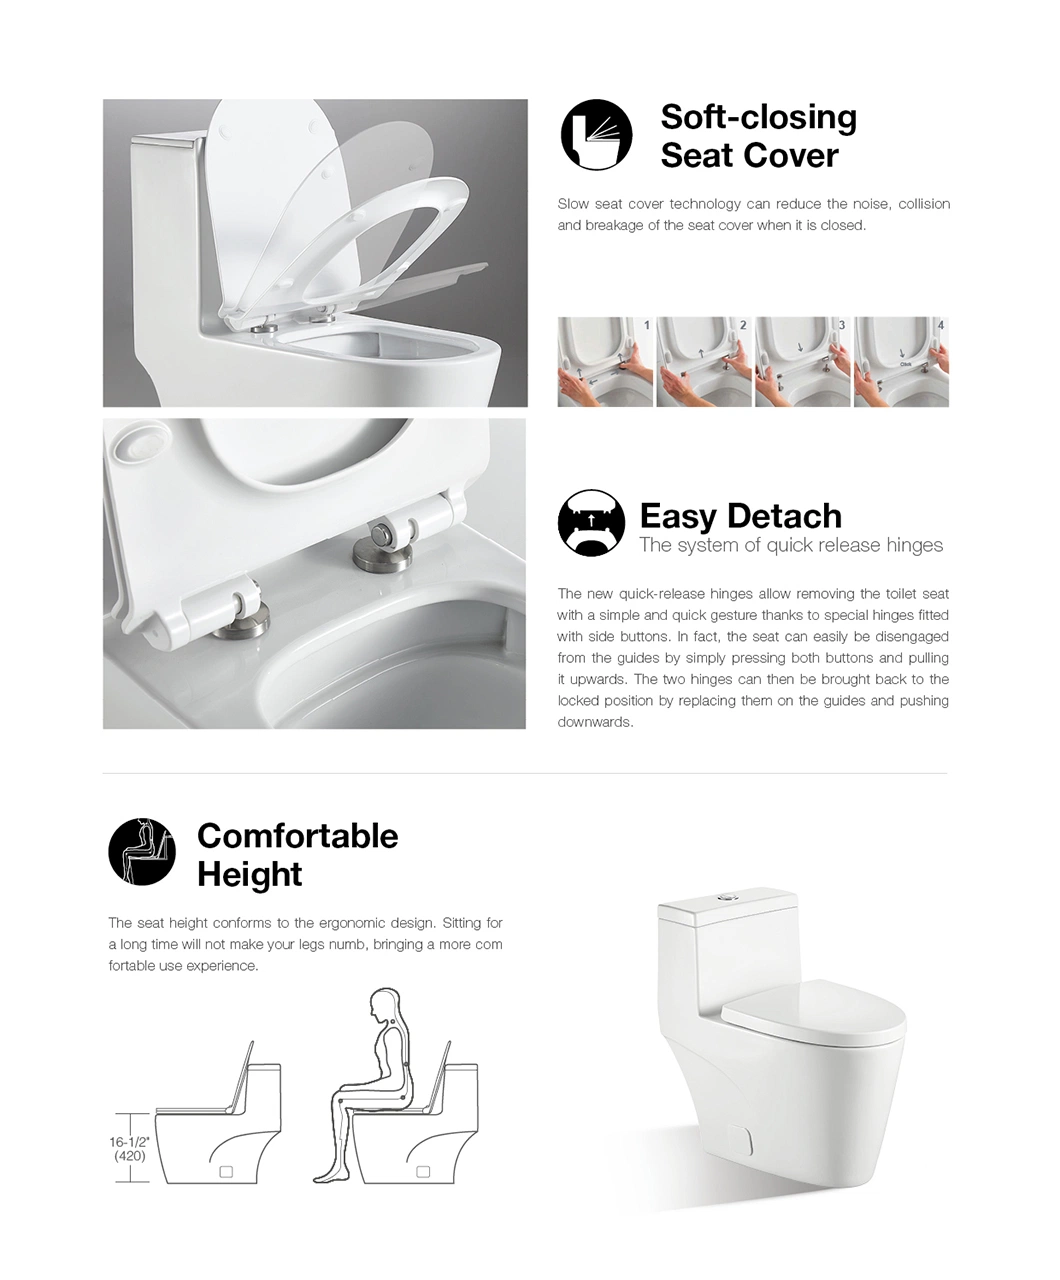 Ada Height Comfortable Simple-to-Clean Chaozhou Factory Siphonic Ceramic Toilet with Cupc Certificate CE